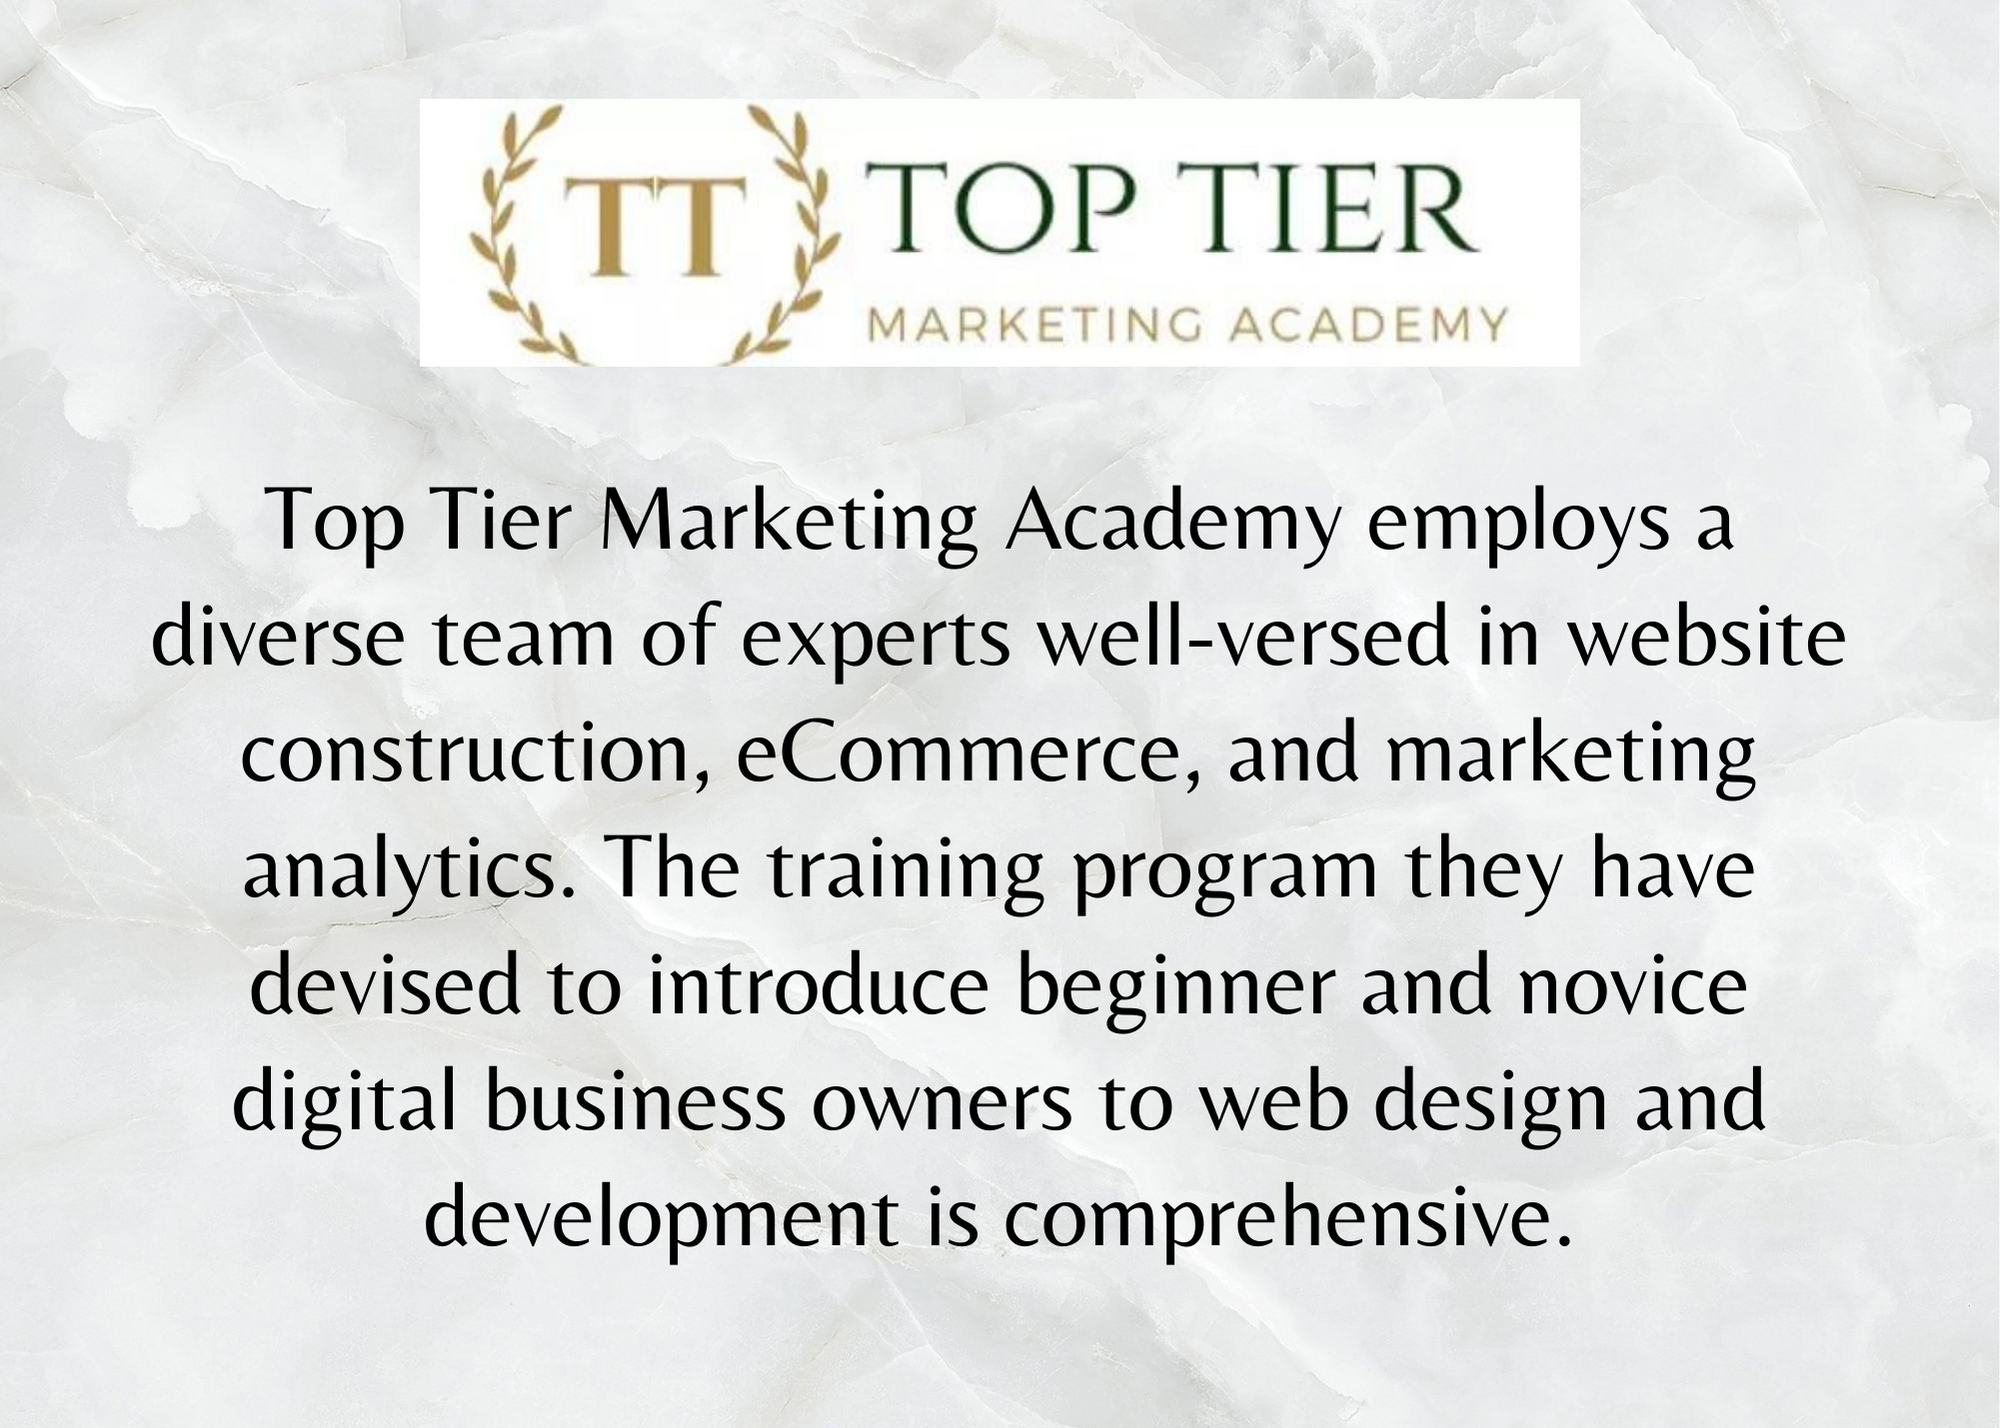 Top Tier Marketing Academy, Wednesday, January 5, 2022, Press release picture